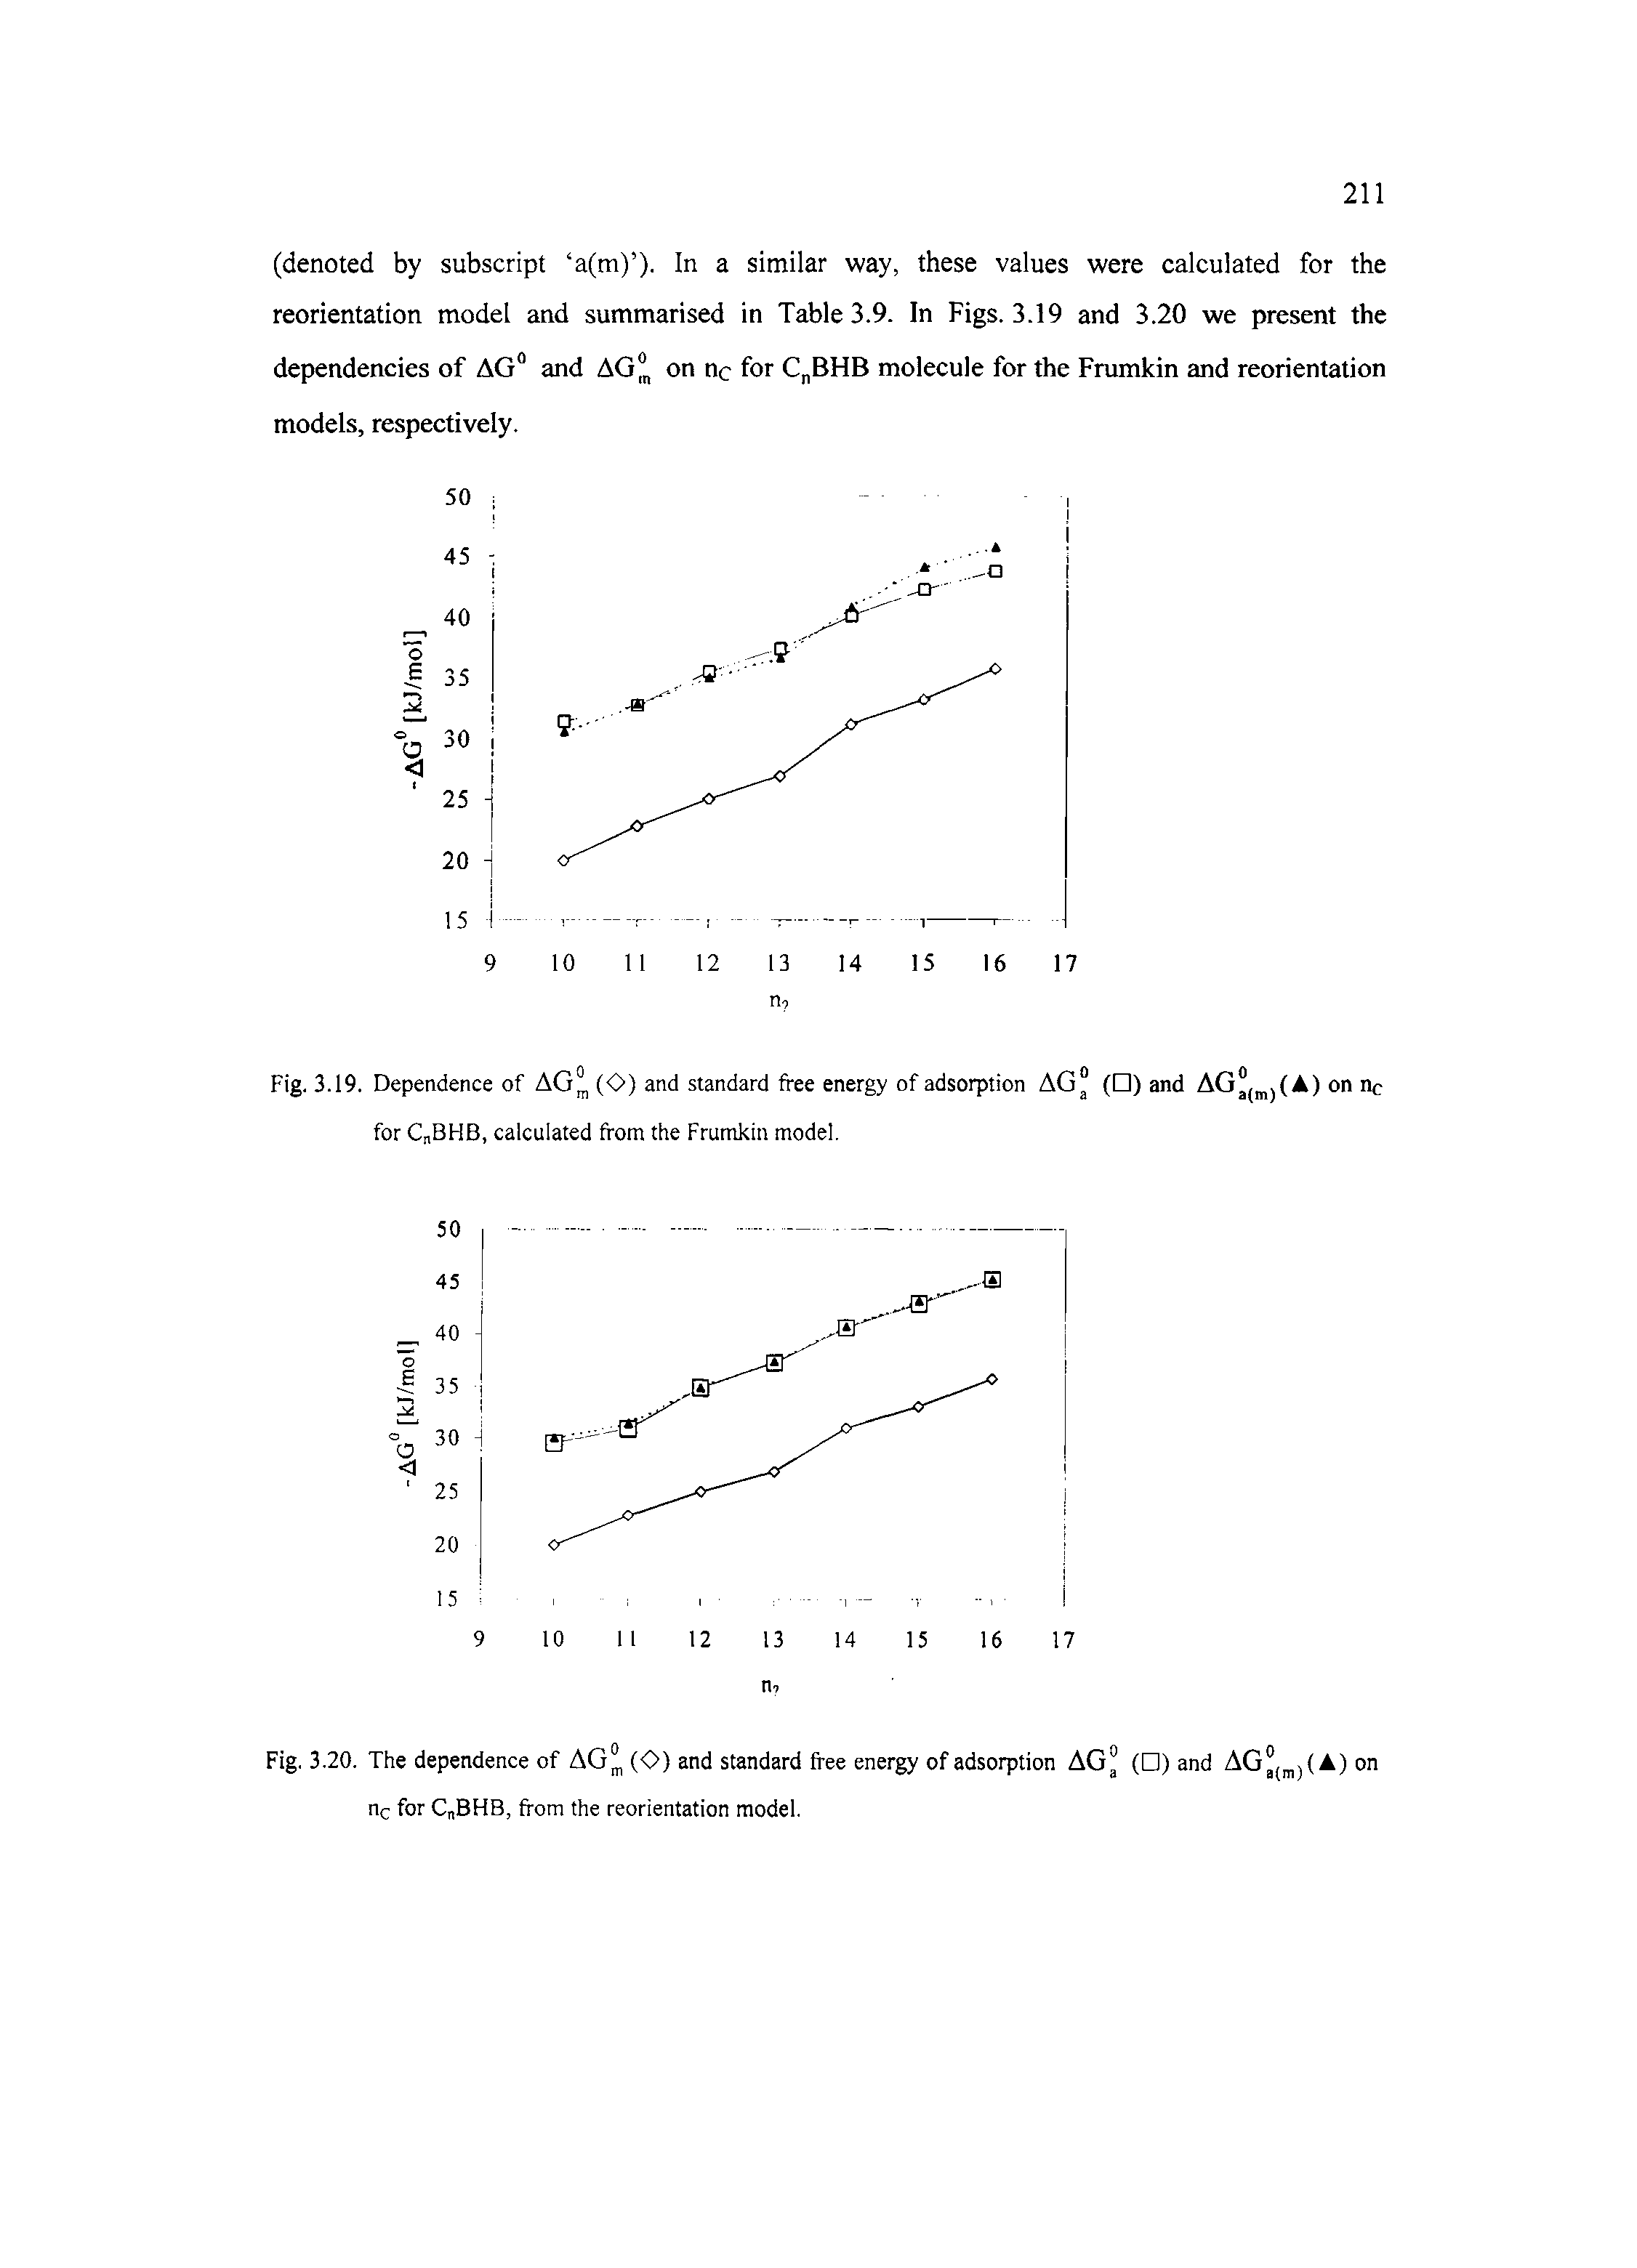 Fig. 3.19. Dependence of AG° (O) and standard free energy of adsorption AG° ( ) and AG jIA) on nc for calculated from the Frumkin model.